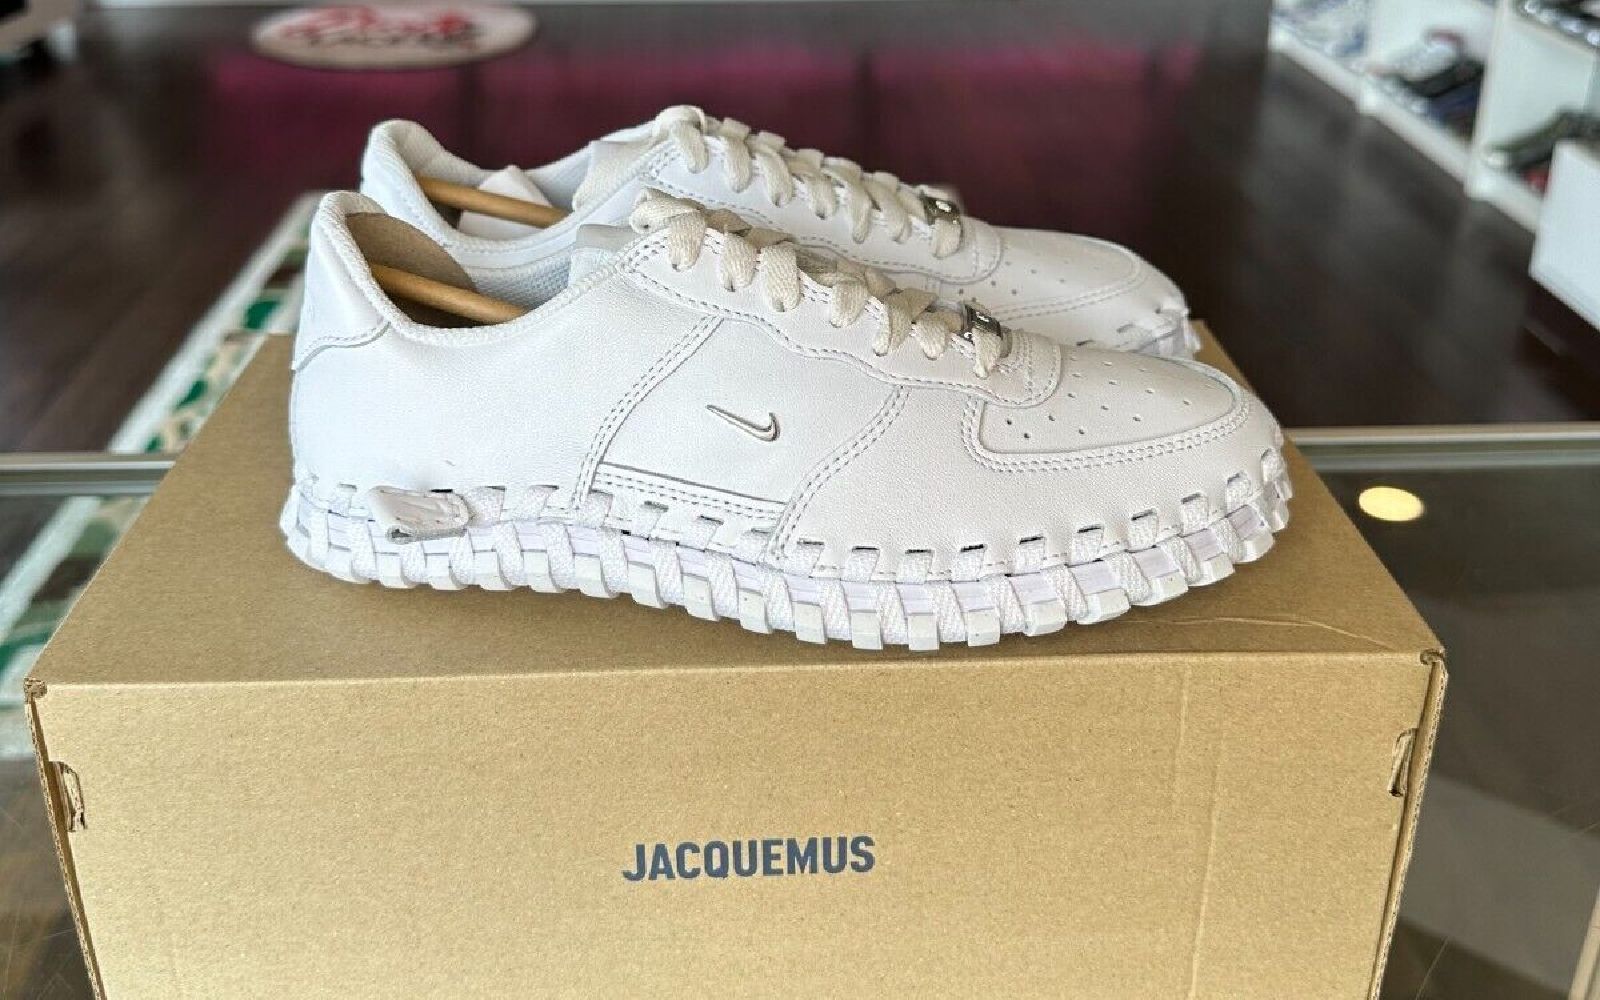 Jacquemus' Air Force 1s have already ended up on eBay